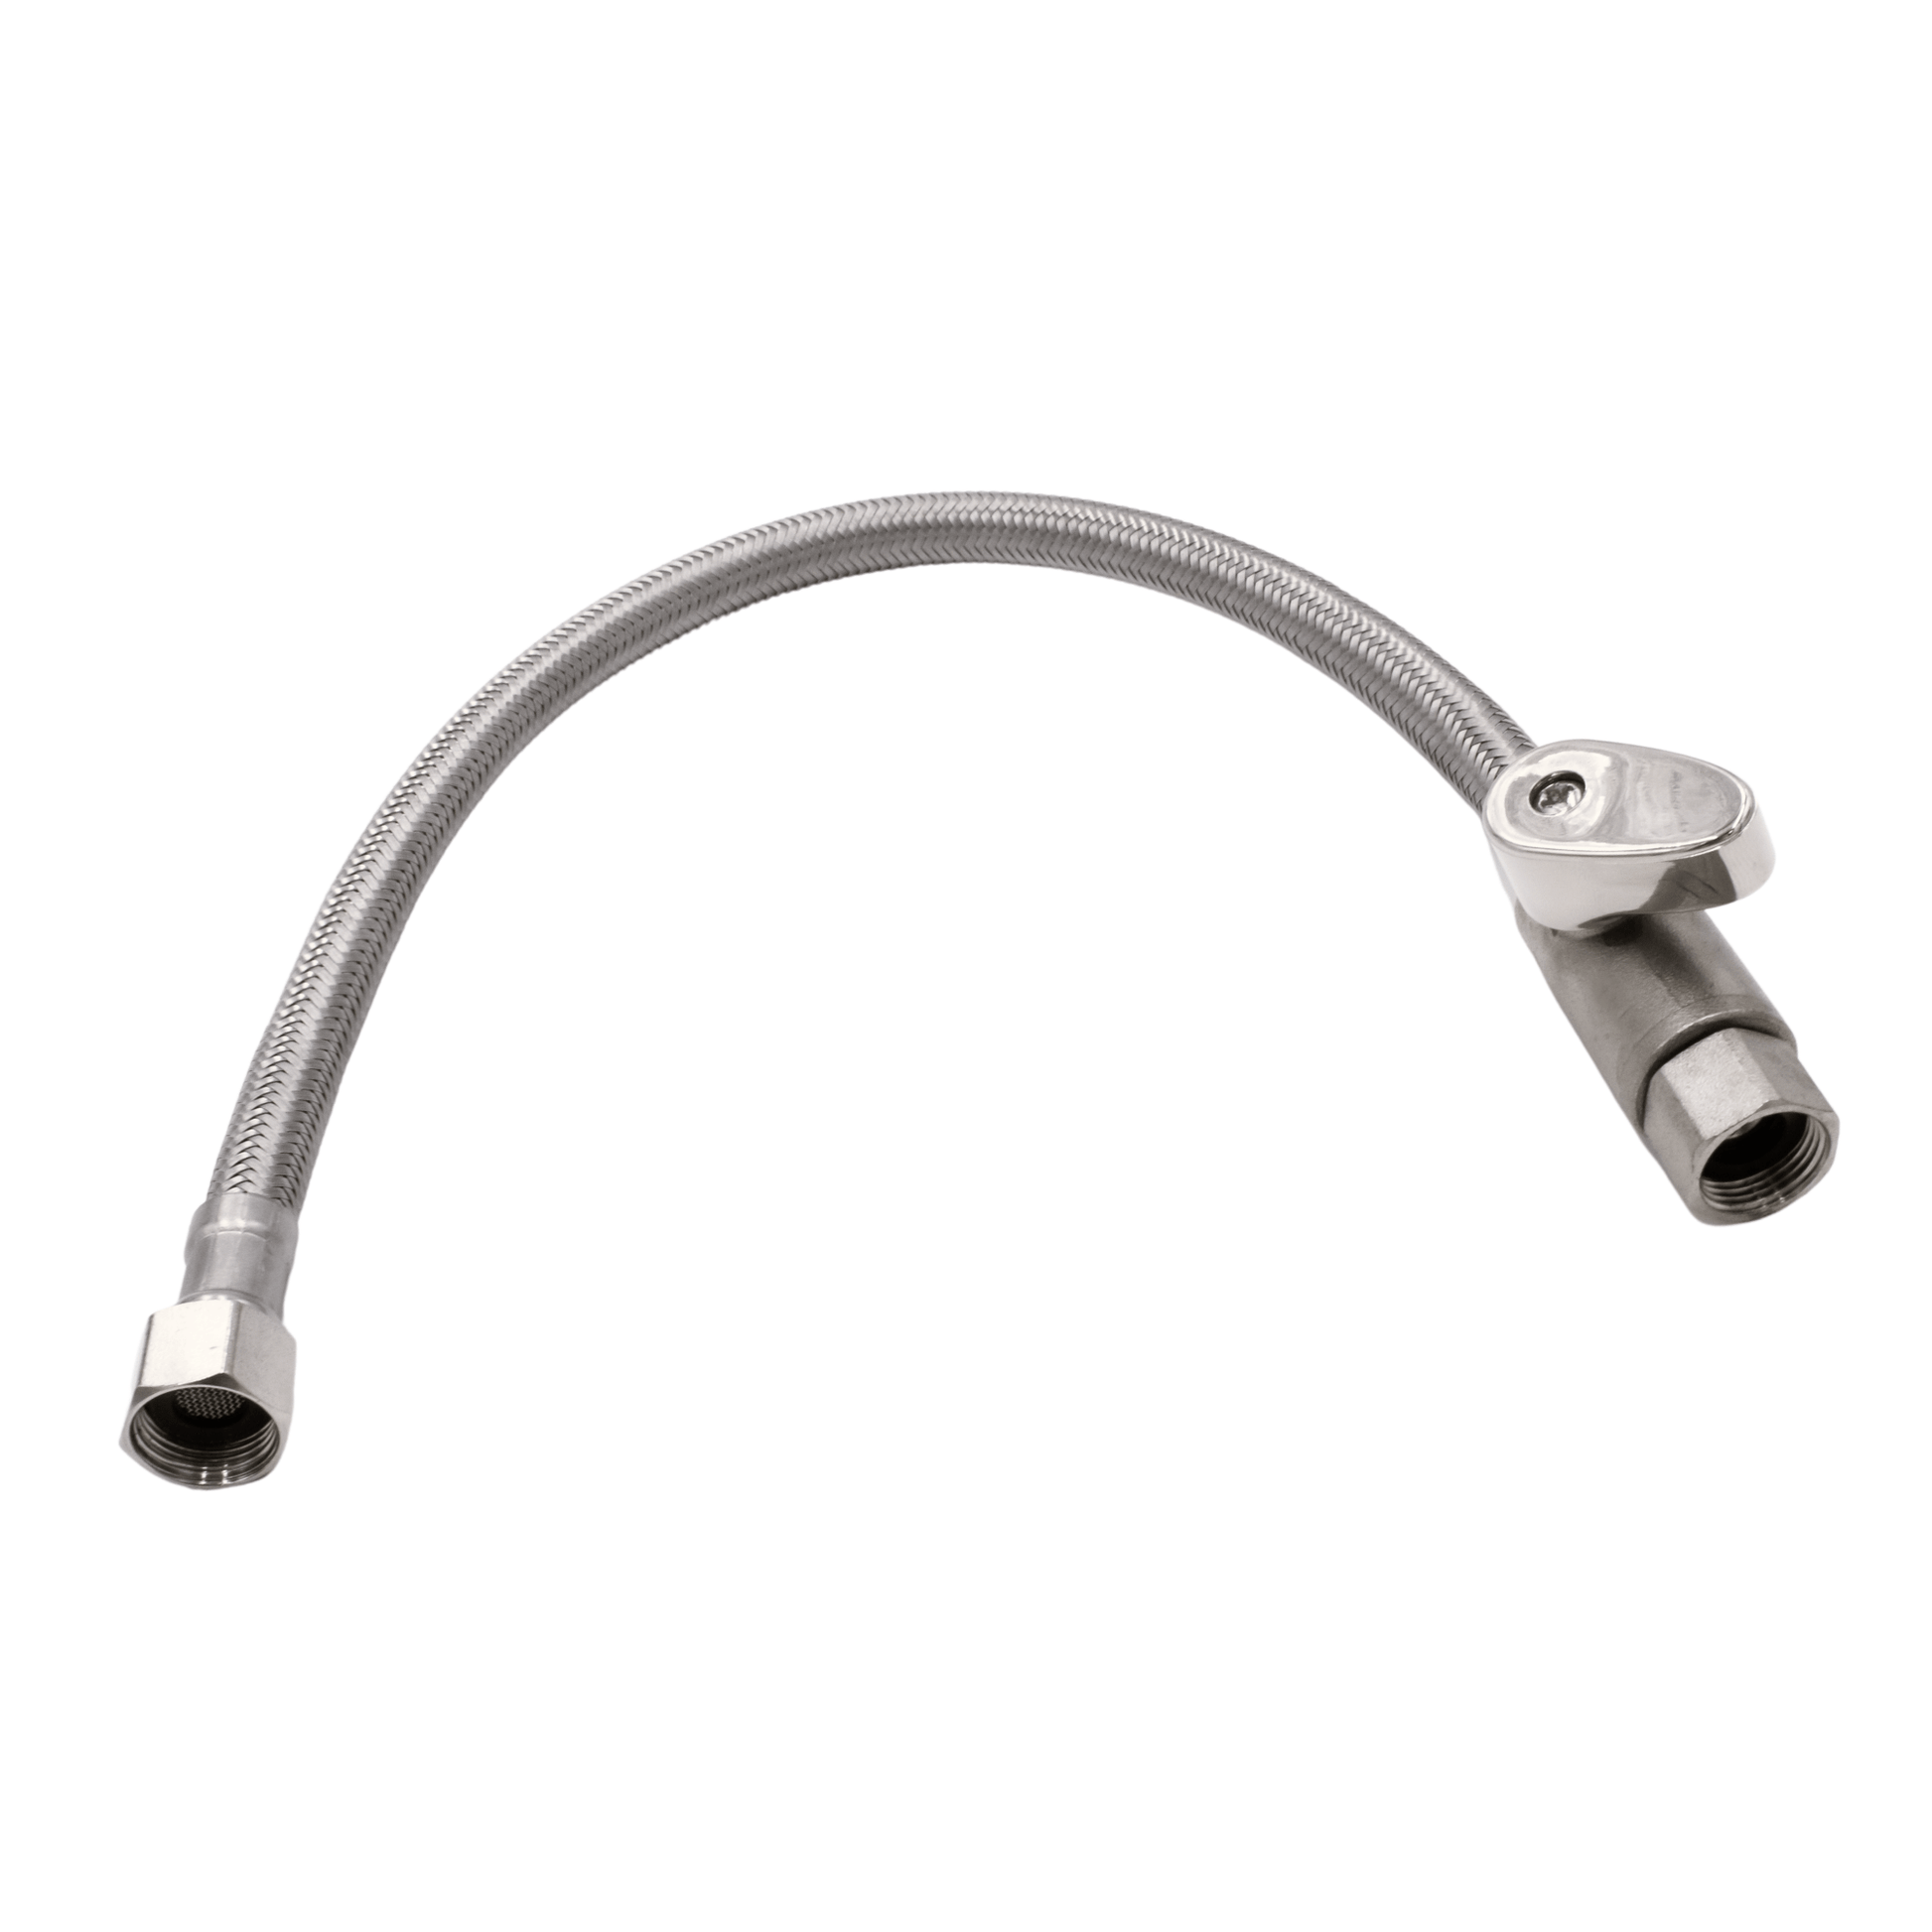 Cold Water, Teardrop shaped, Nickel, Shut-Off Hose with ball-valve